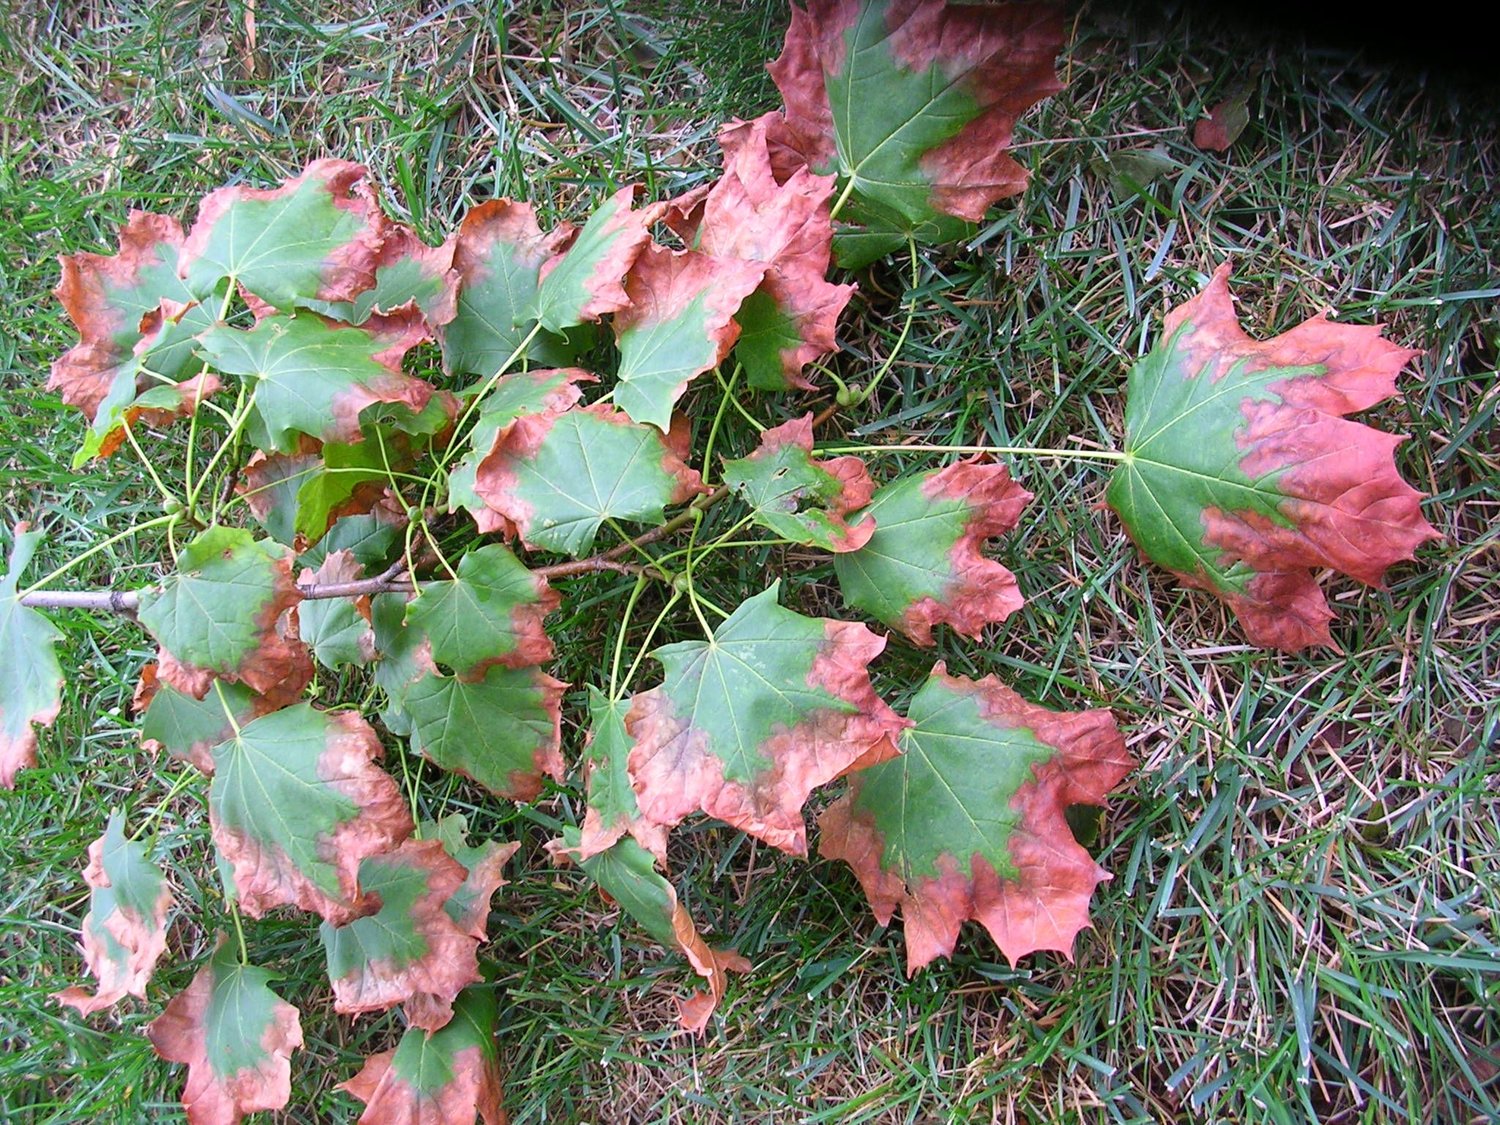 Visual signs of drought injury include: wilting, yellow, curling, marginally scorch leaves or drop early leaf fall.